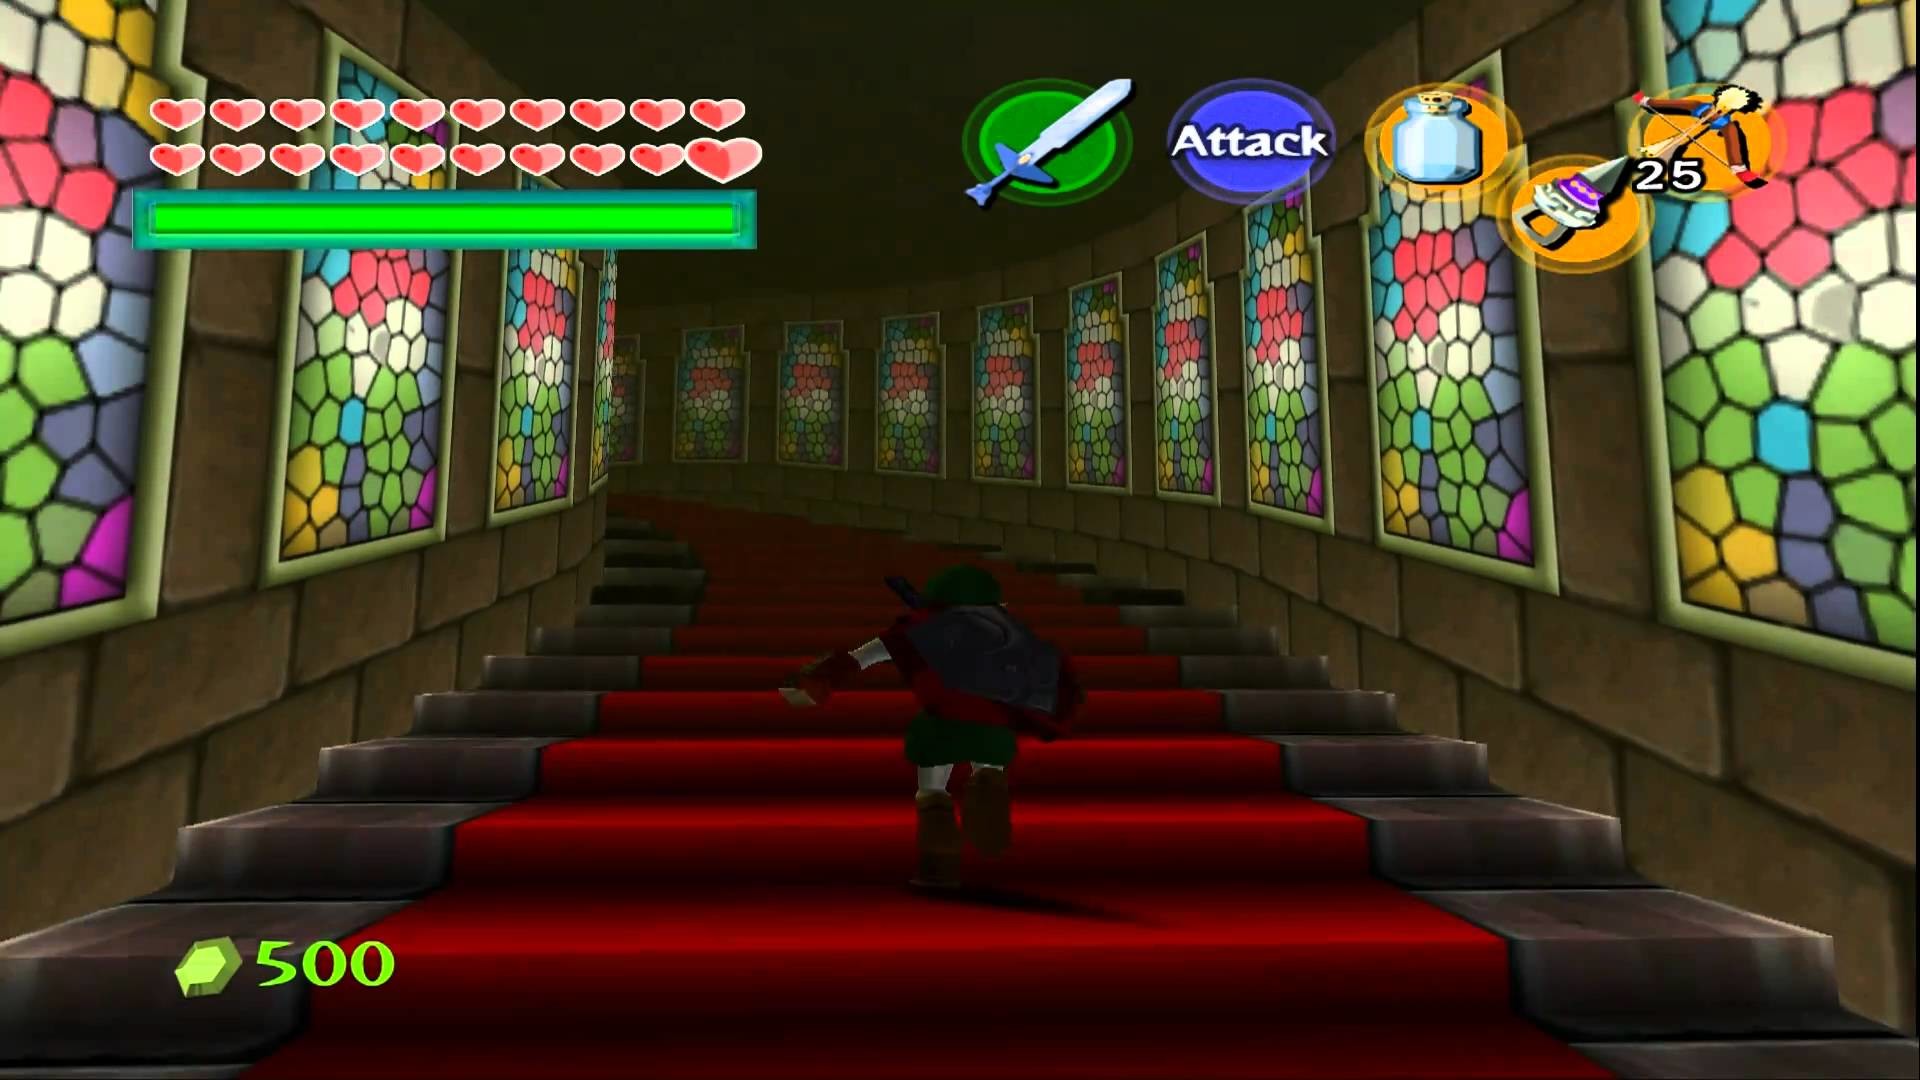 1920x1080 The Legend of Zelda ocarina of time HD texture testing 2 outdated - YouTube